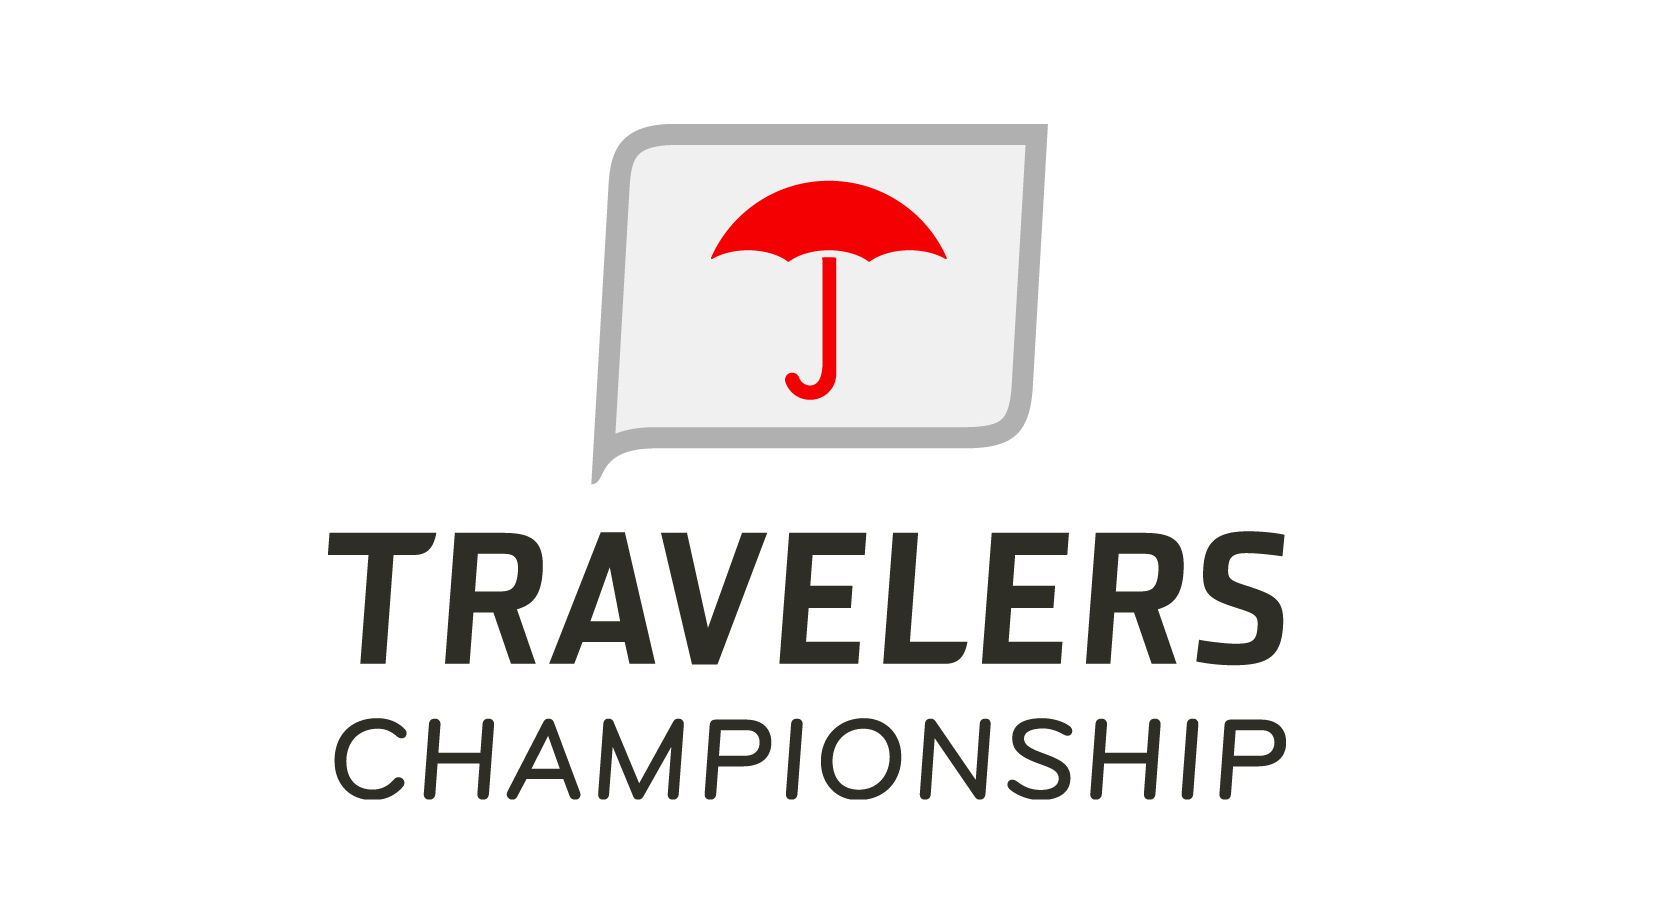 Travelers Championship history, results and past winners